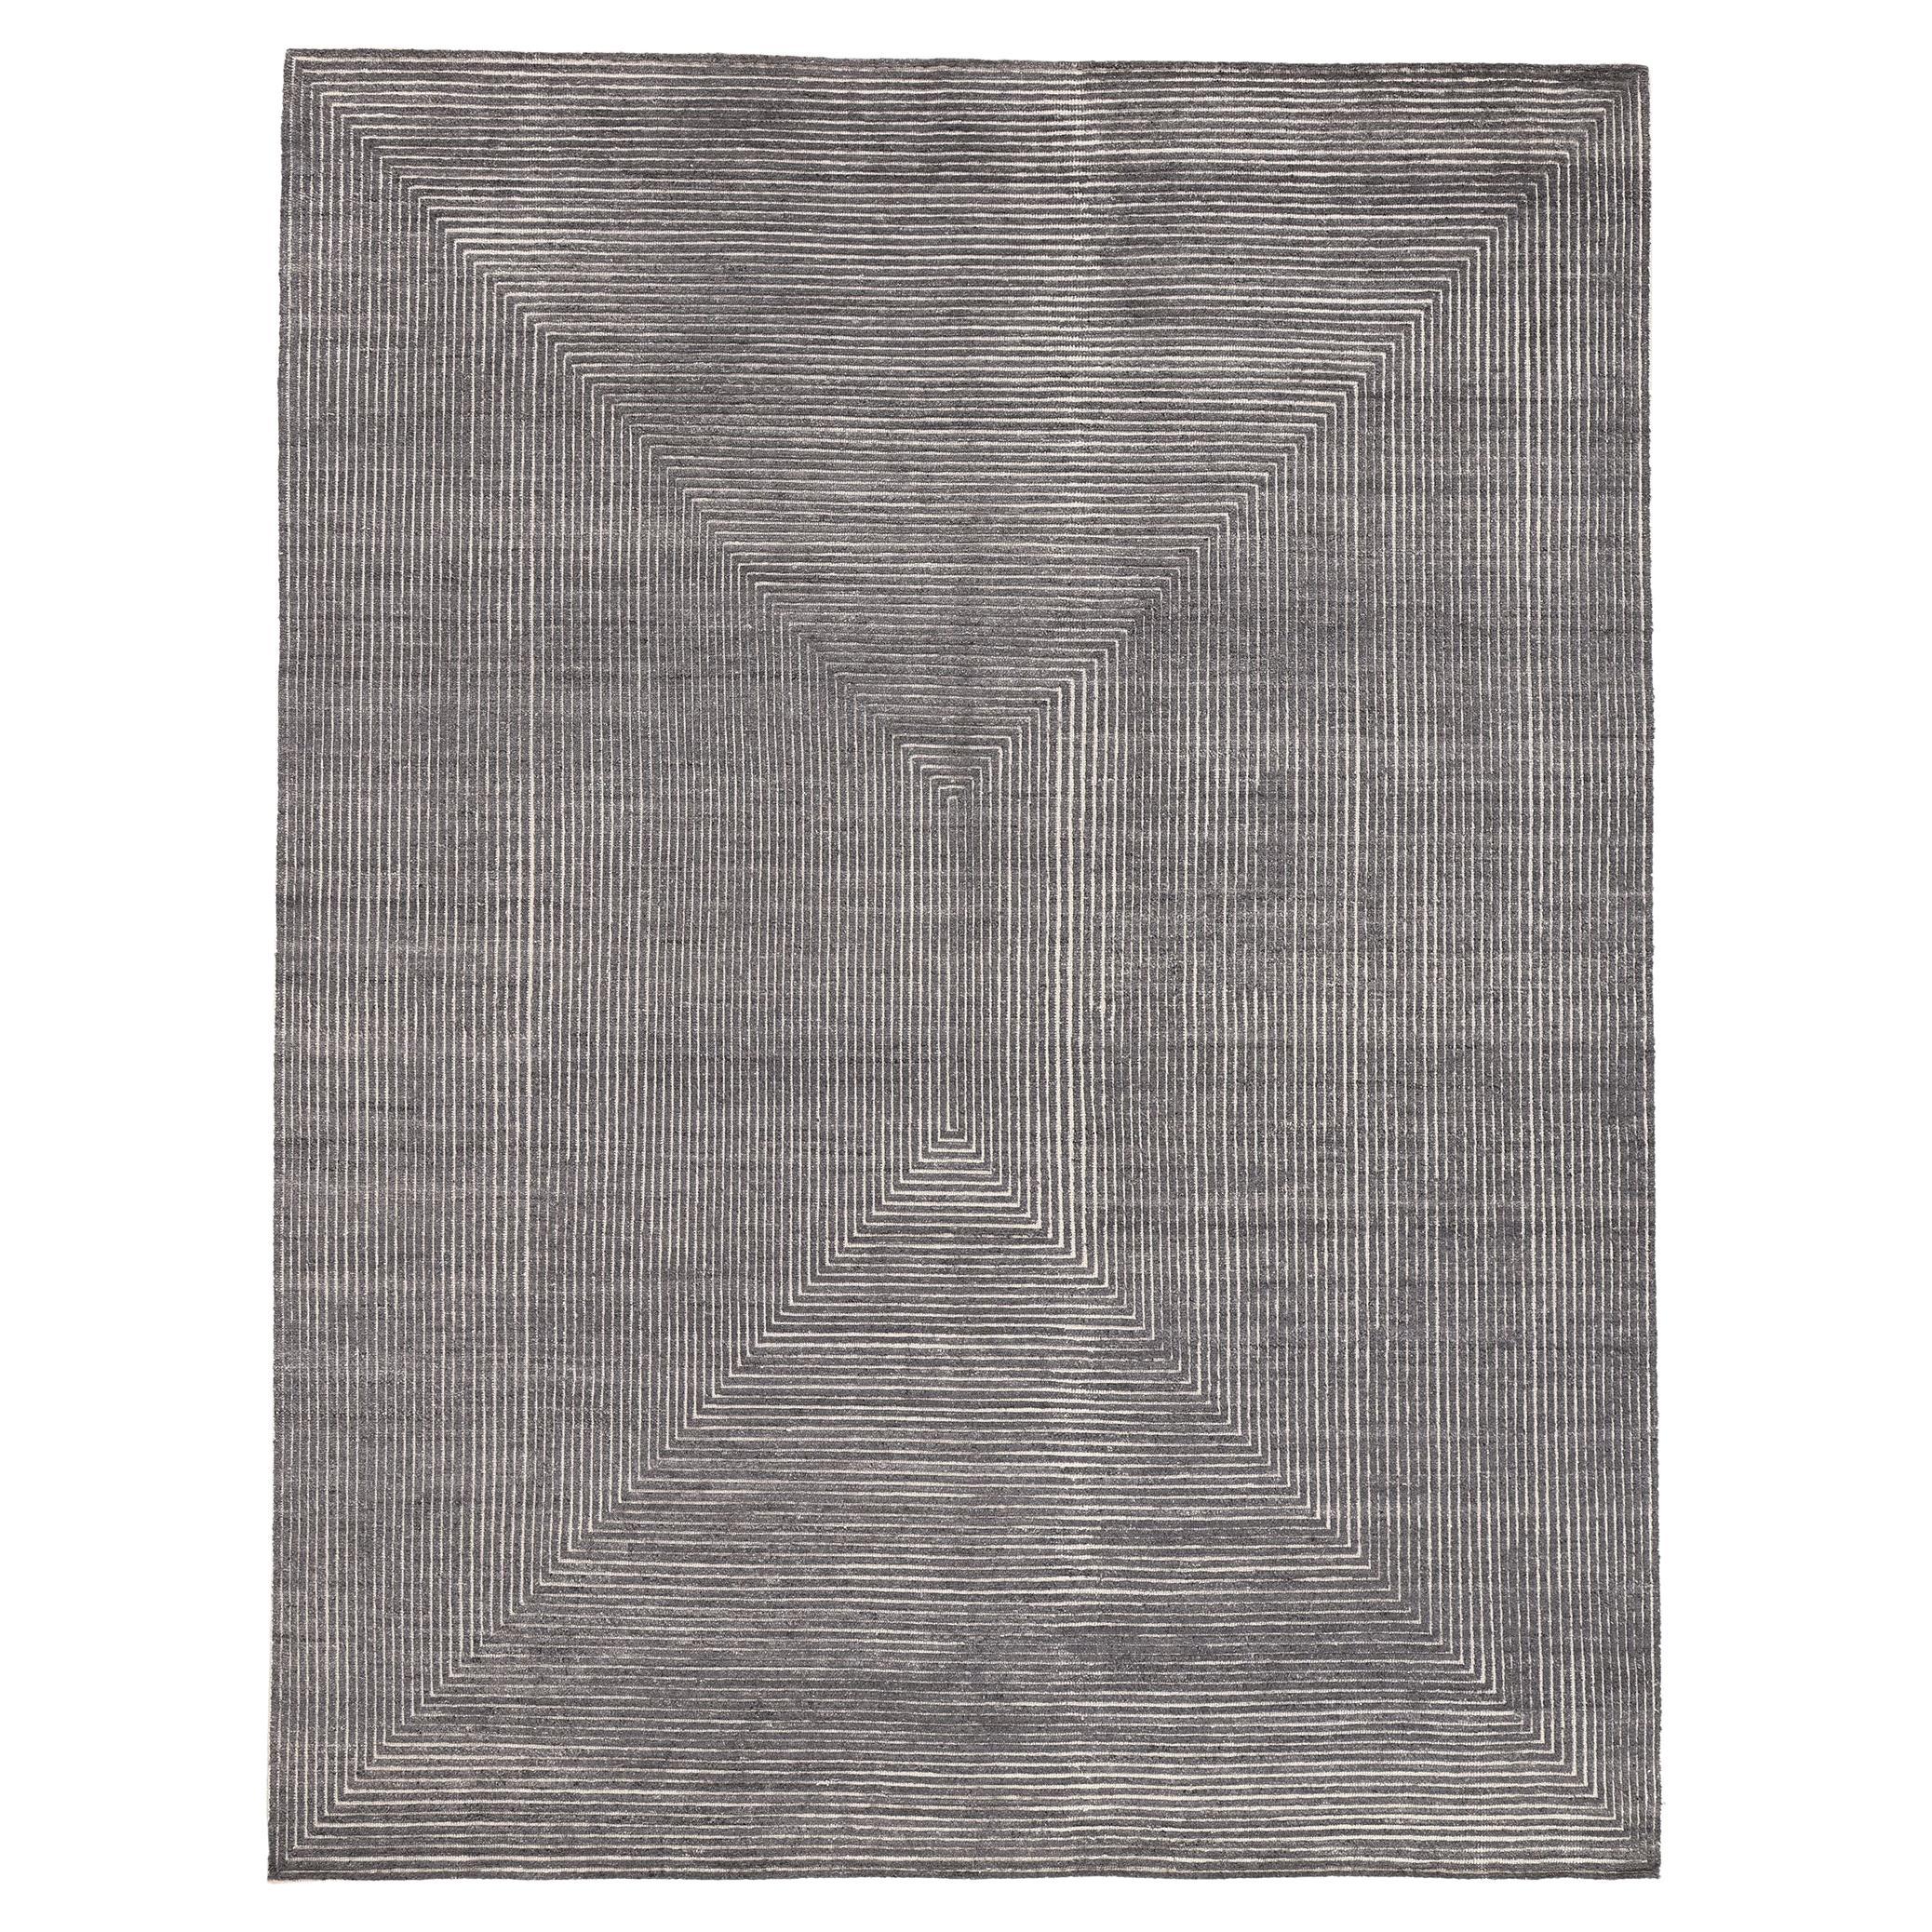 Modern Gray Opt Art High-Low Rug, Sublime Simplicity Meets Tantalizing Texture